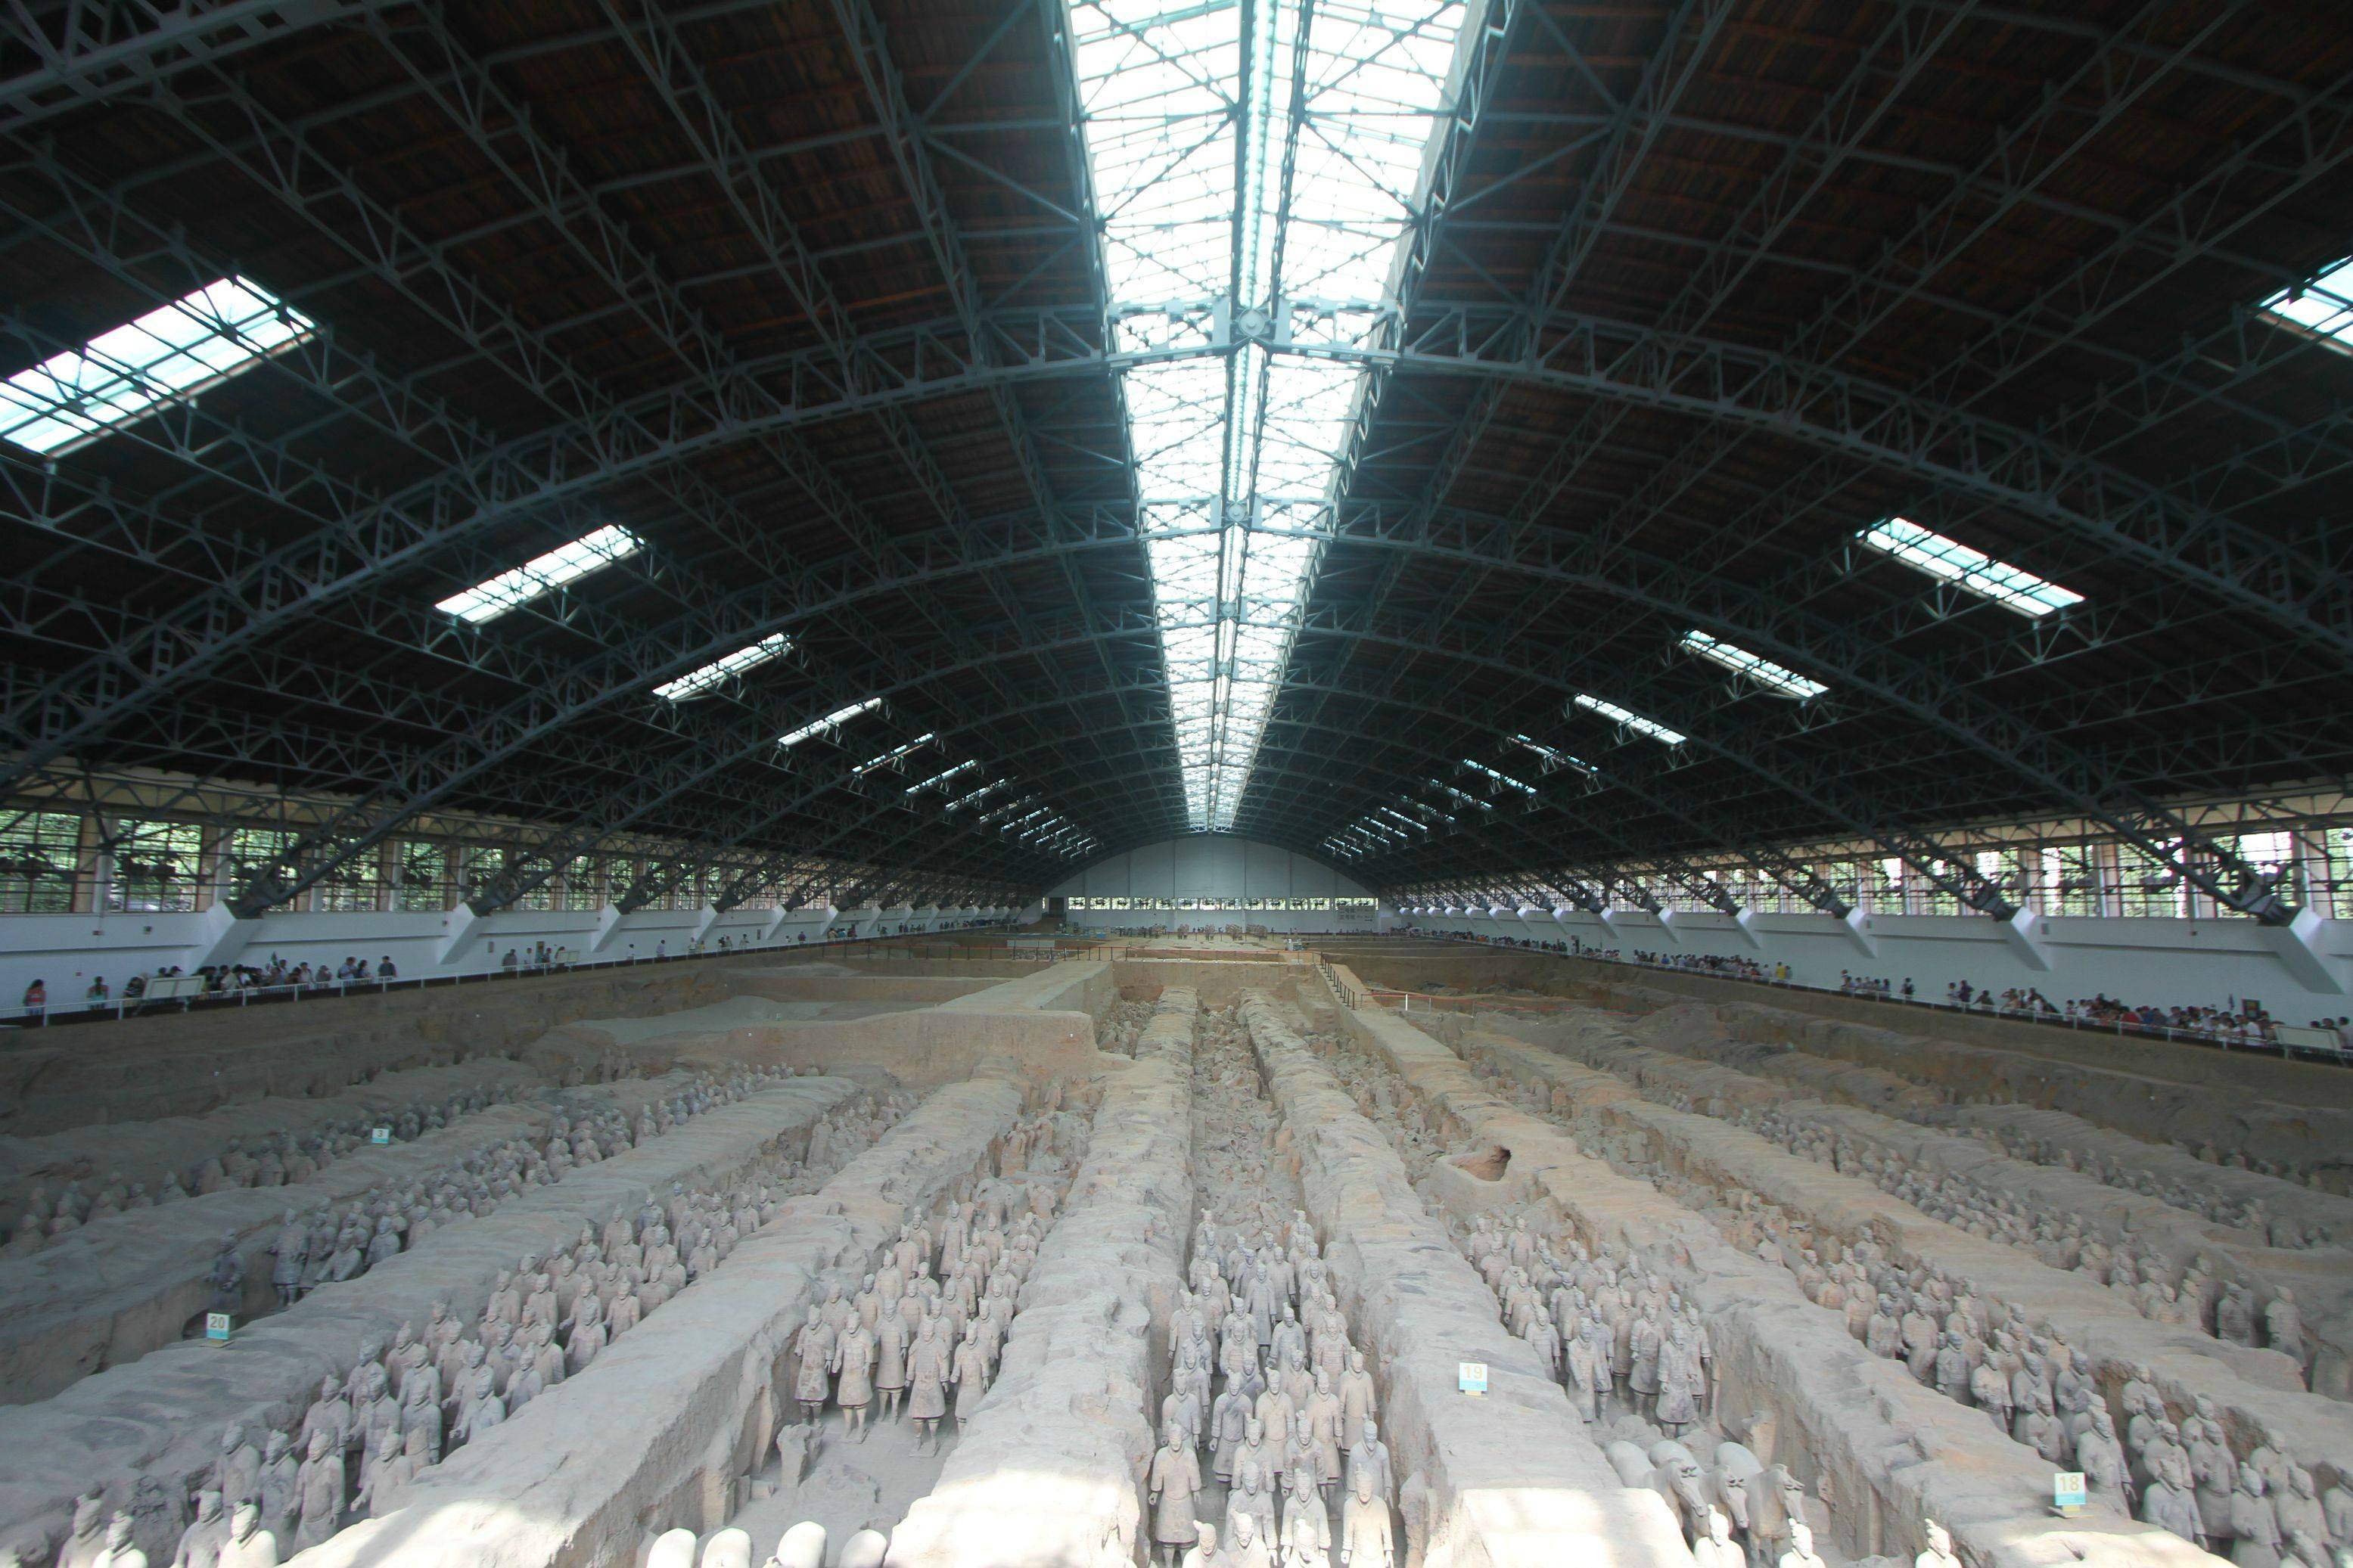 Terracotta Army Museum